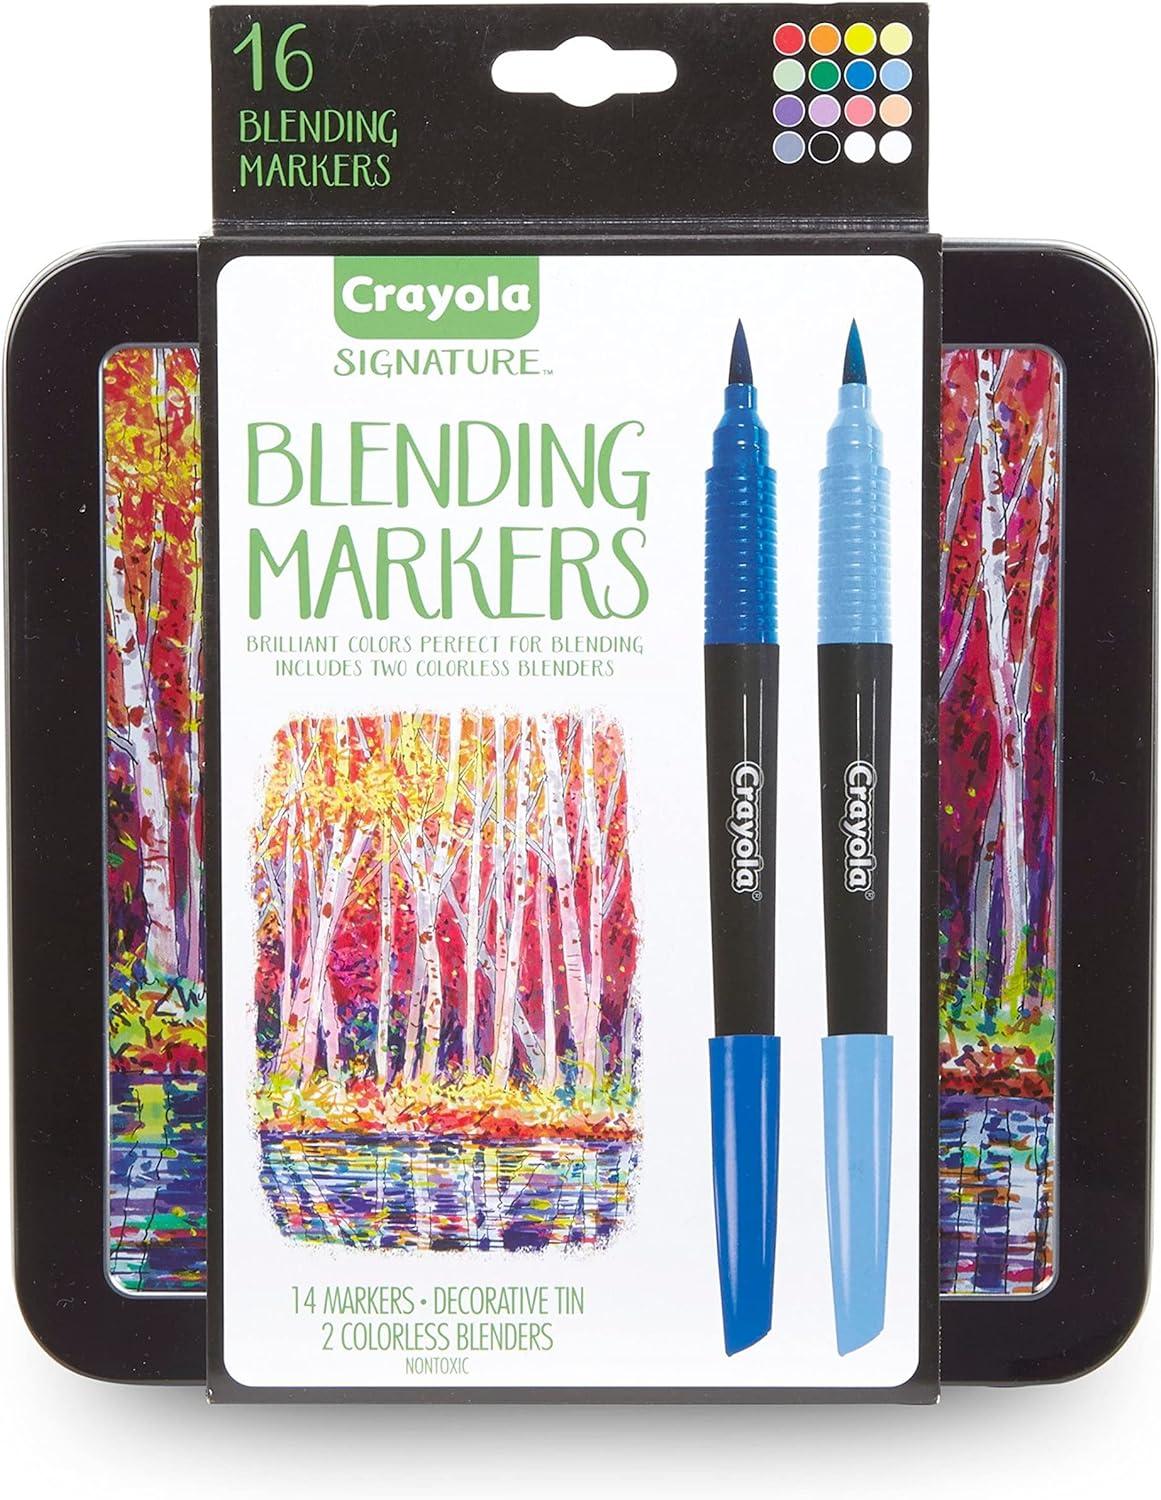 Crayola Colors Of The World Classpack (240 Ct), Bulk Skin Tone Washable  Markers, School Supplies For Teachers, Individual Marker Boxes